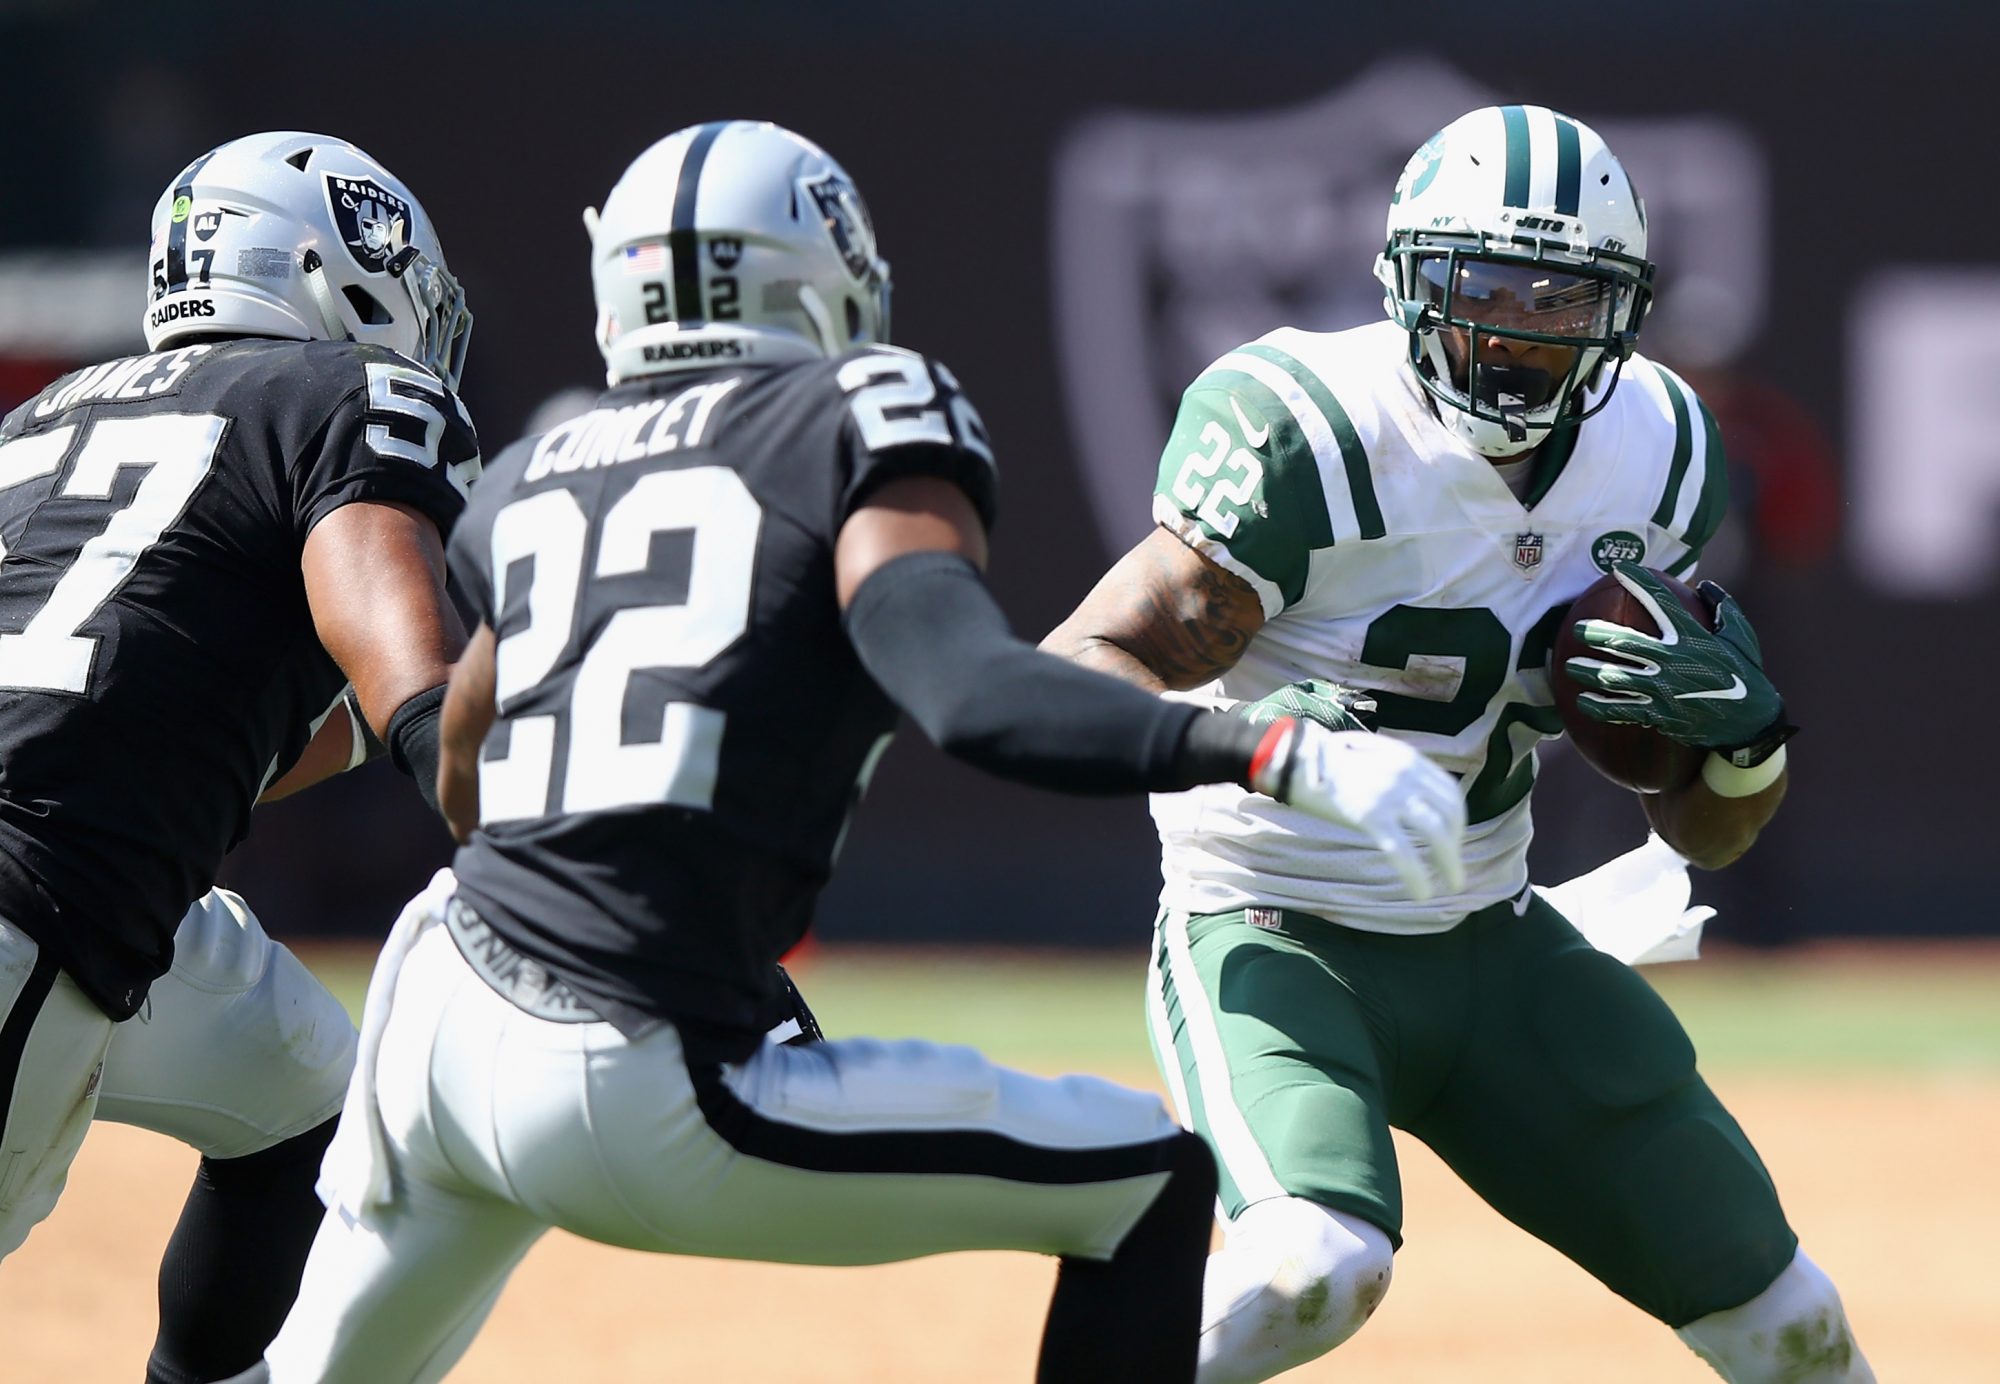 5 Questions For The New York Jets Offense Heading Into Home Opener 2